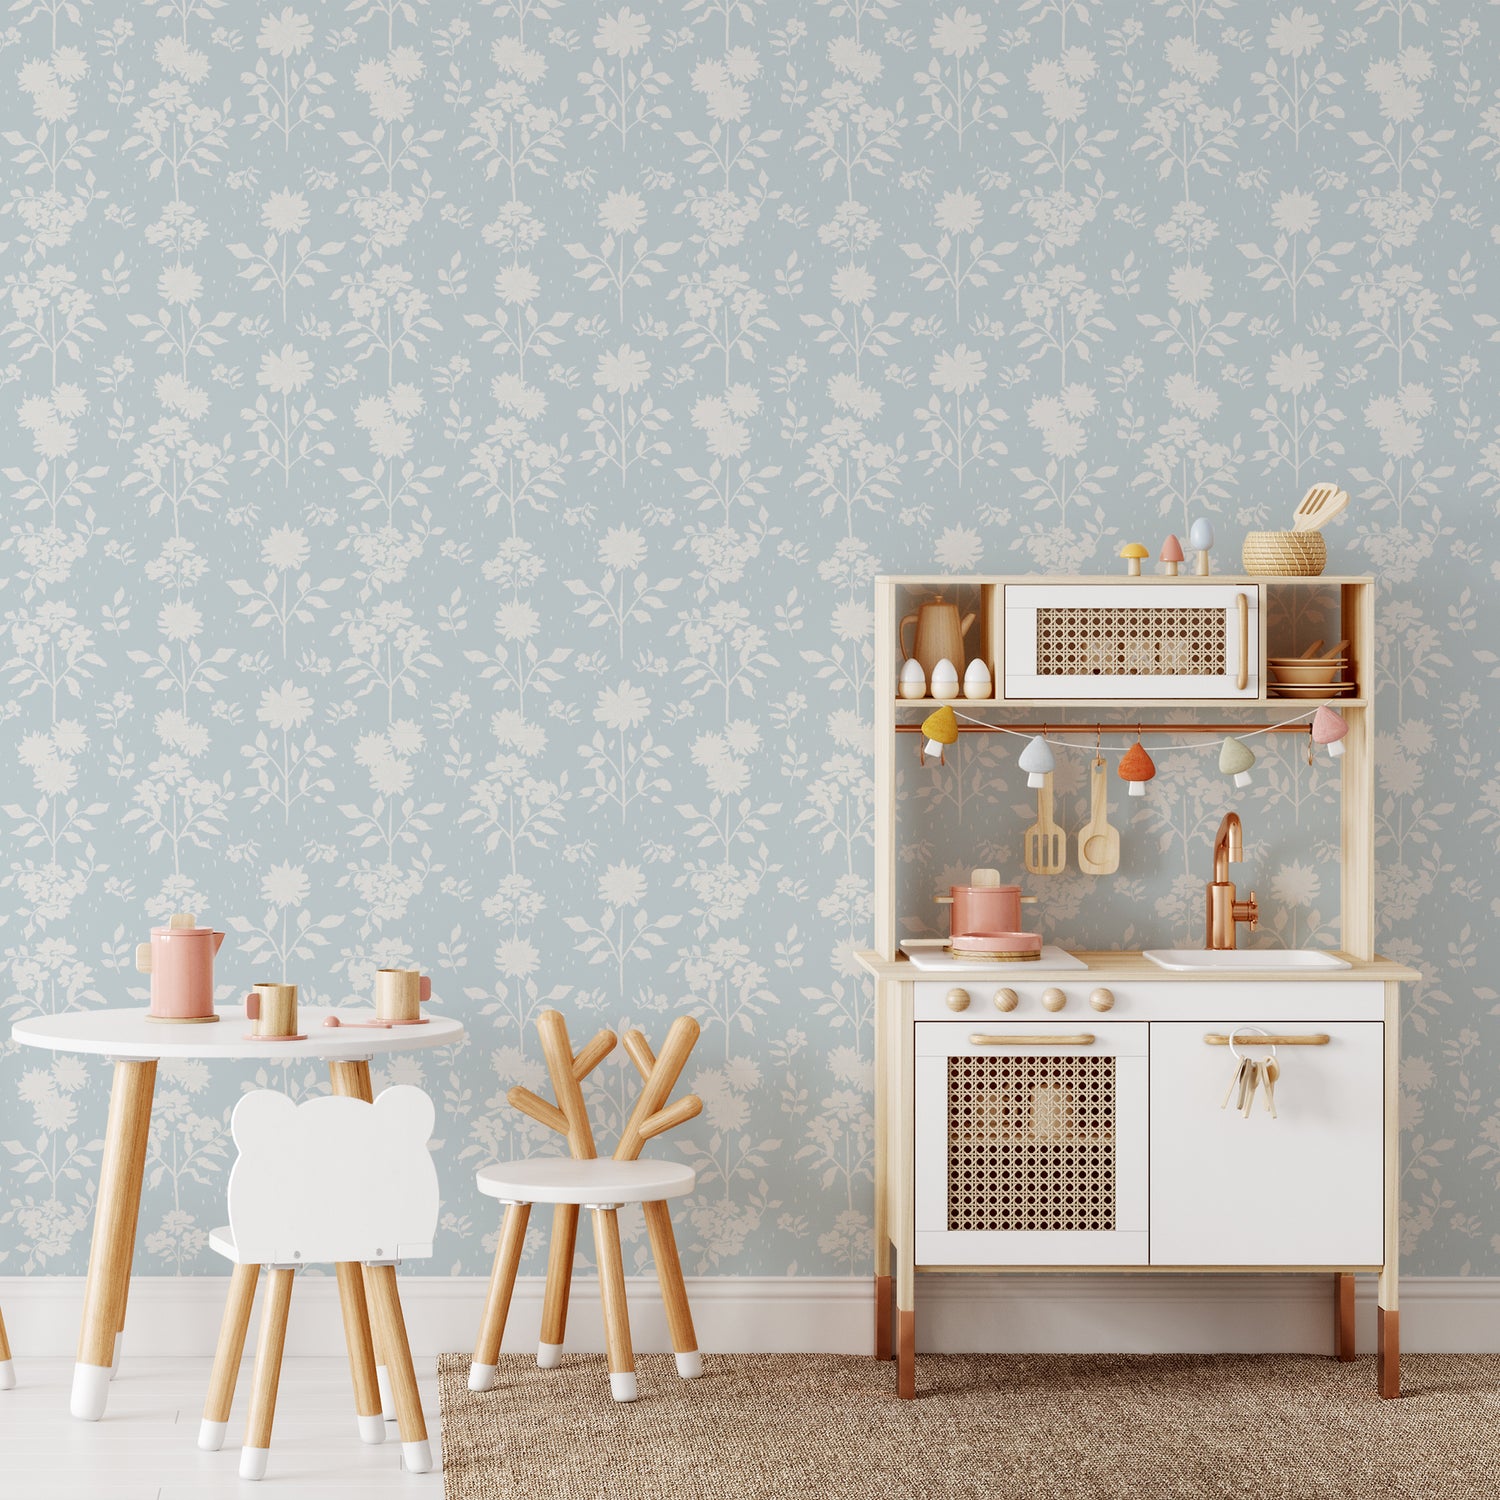 Blue peel and stick wallpaper with delicate white floral pattern, adding a touch of elegance and beauty to any space.